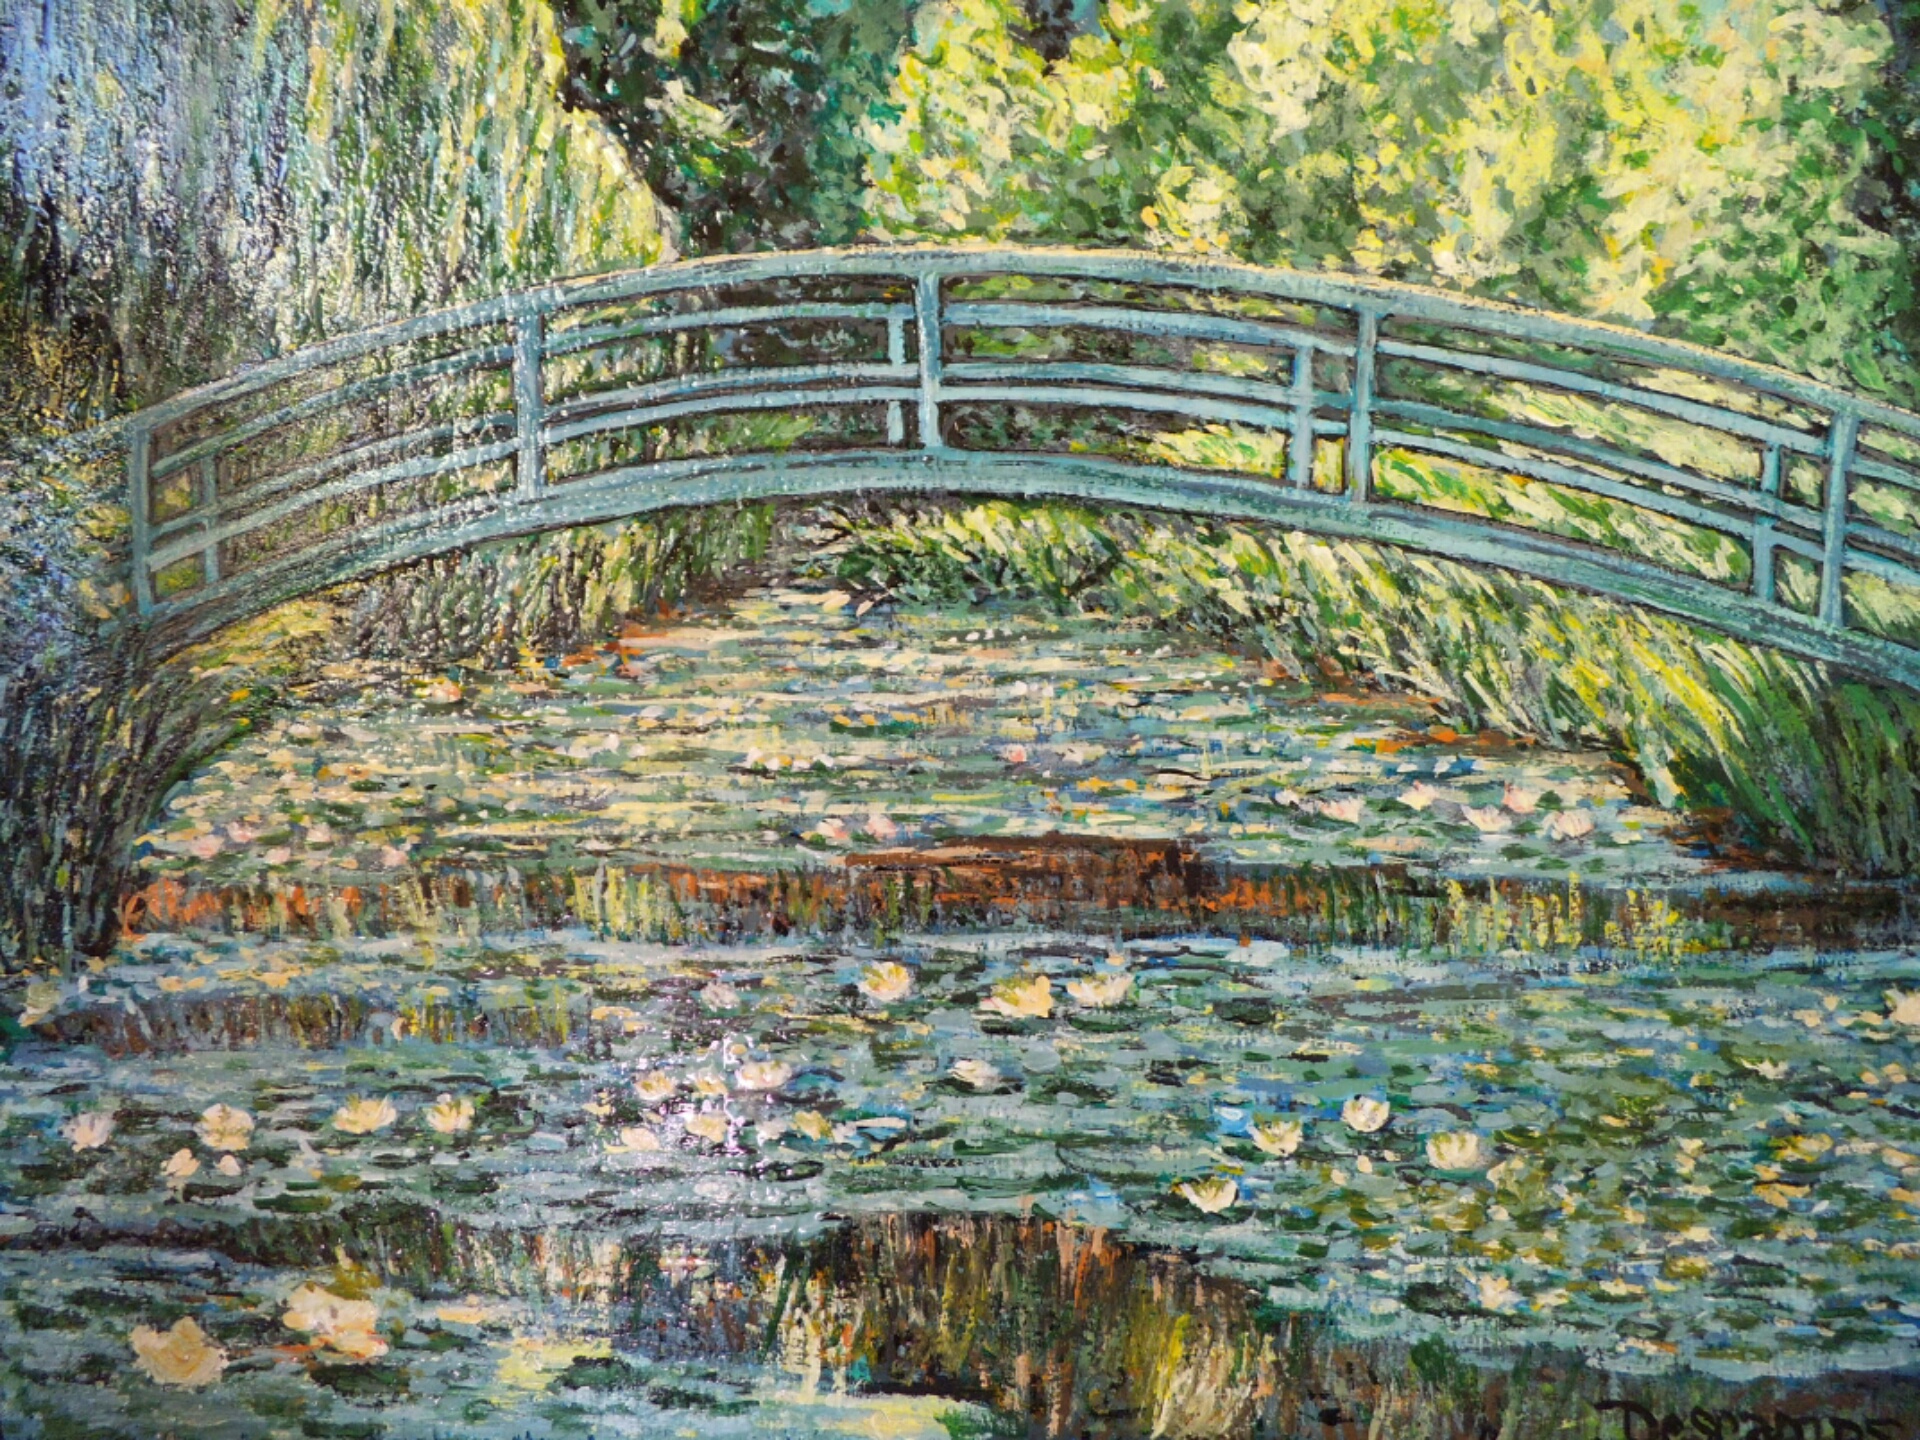 The japanese bridge and water lilies pond